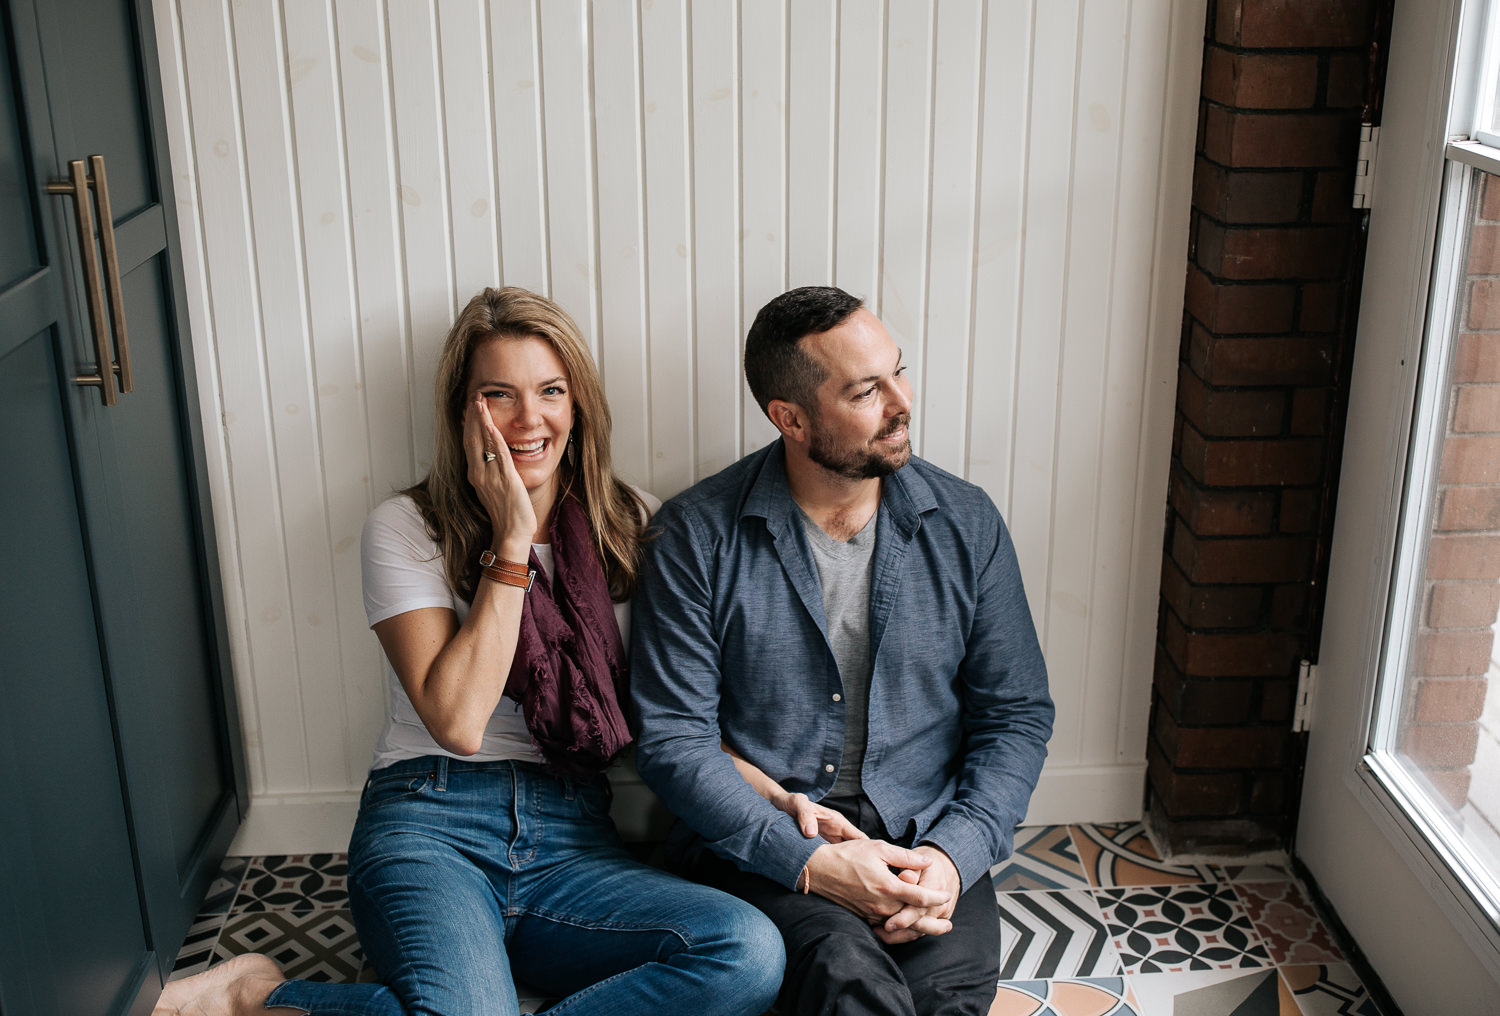 husband and wife sitting on ground of colourful tile, leaning against wall, arms linked, holding hands, man looking to side, woman's hand on cheek smiling at camera  -  York Region Lifestyle Photos